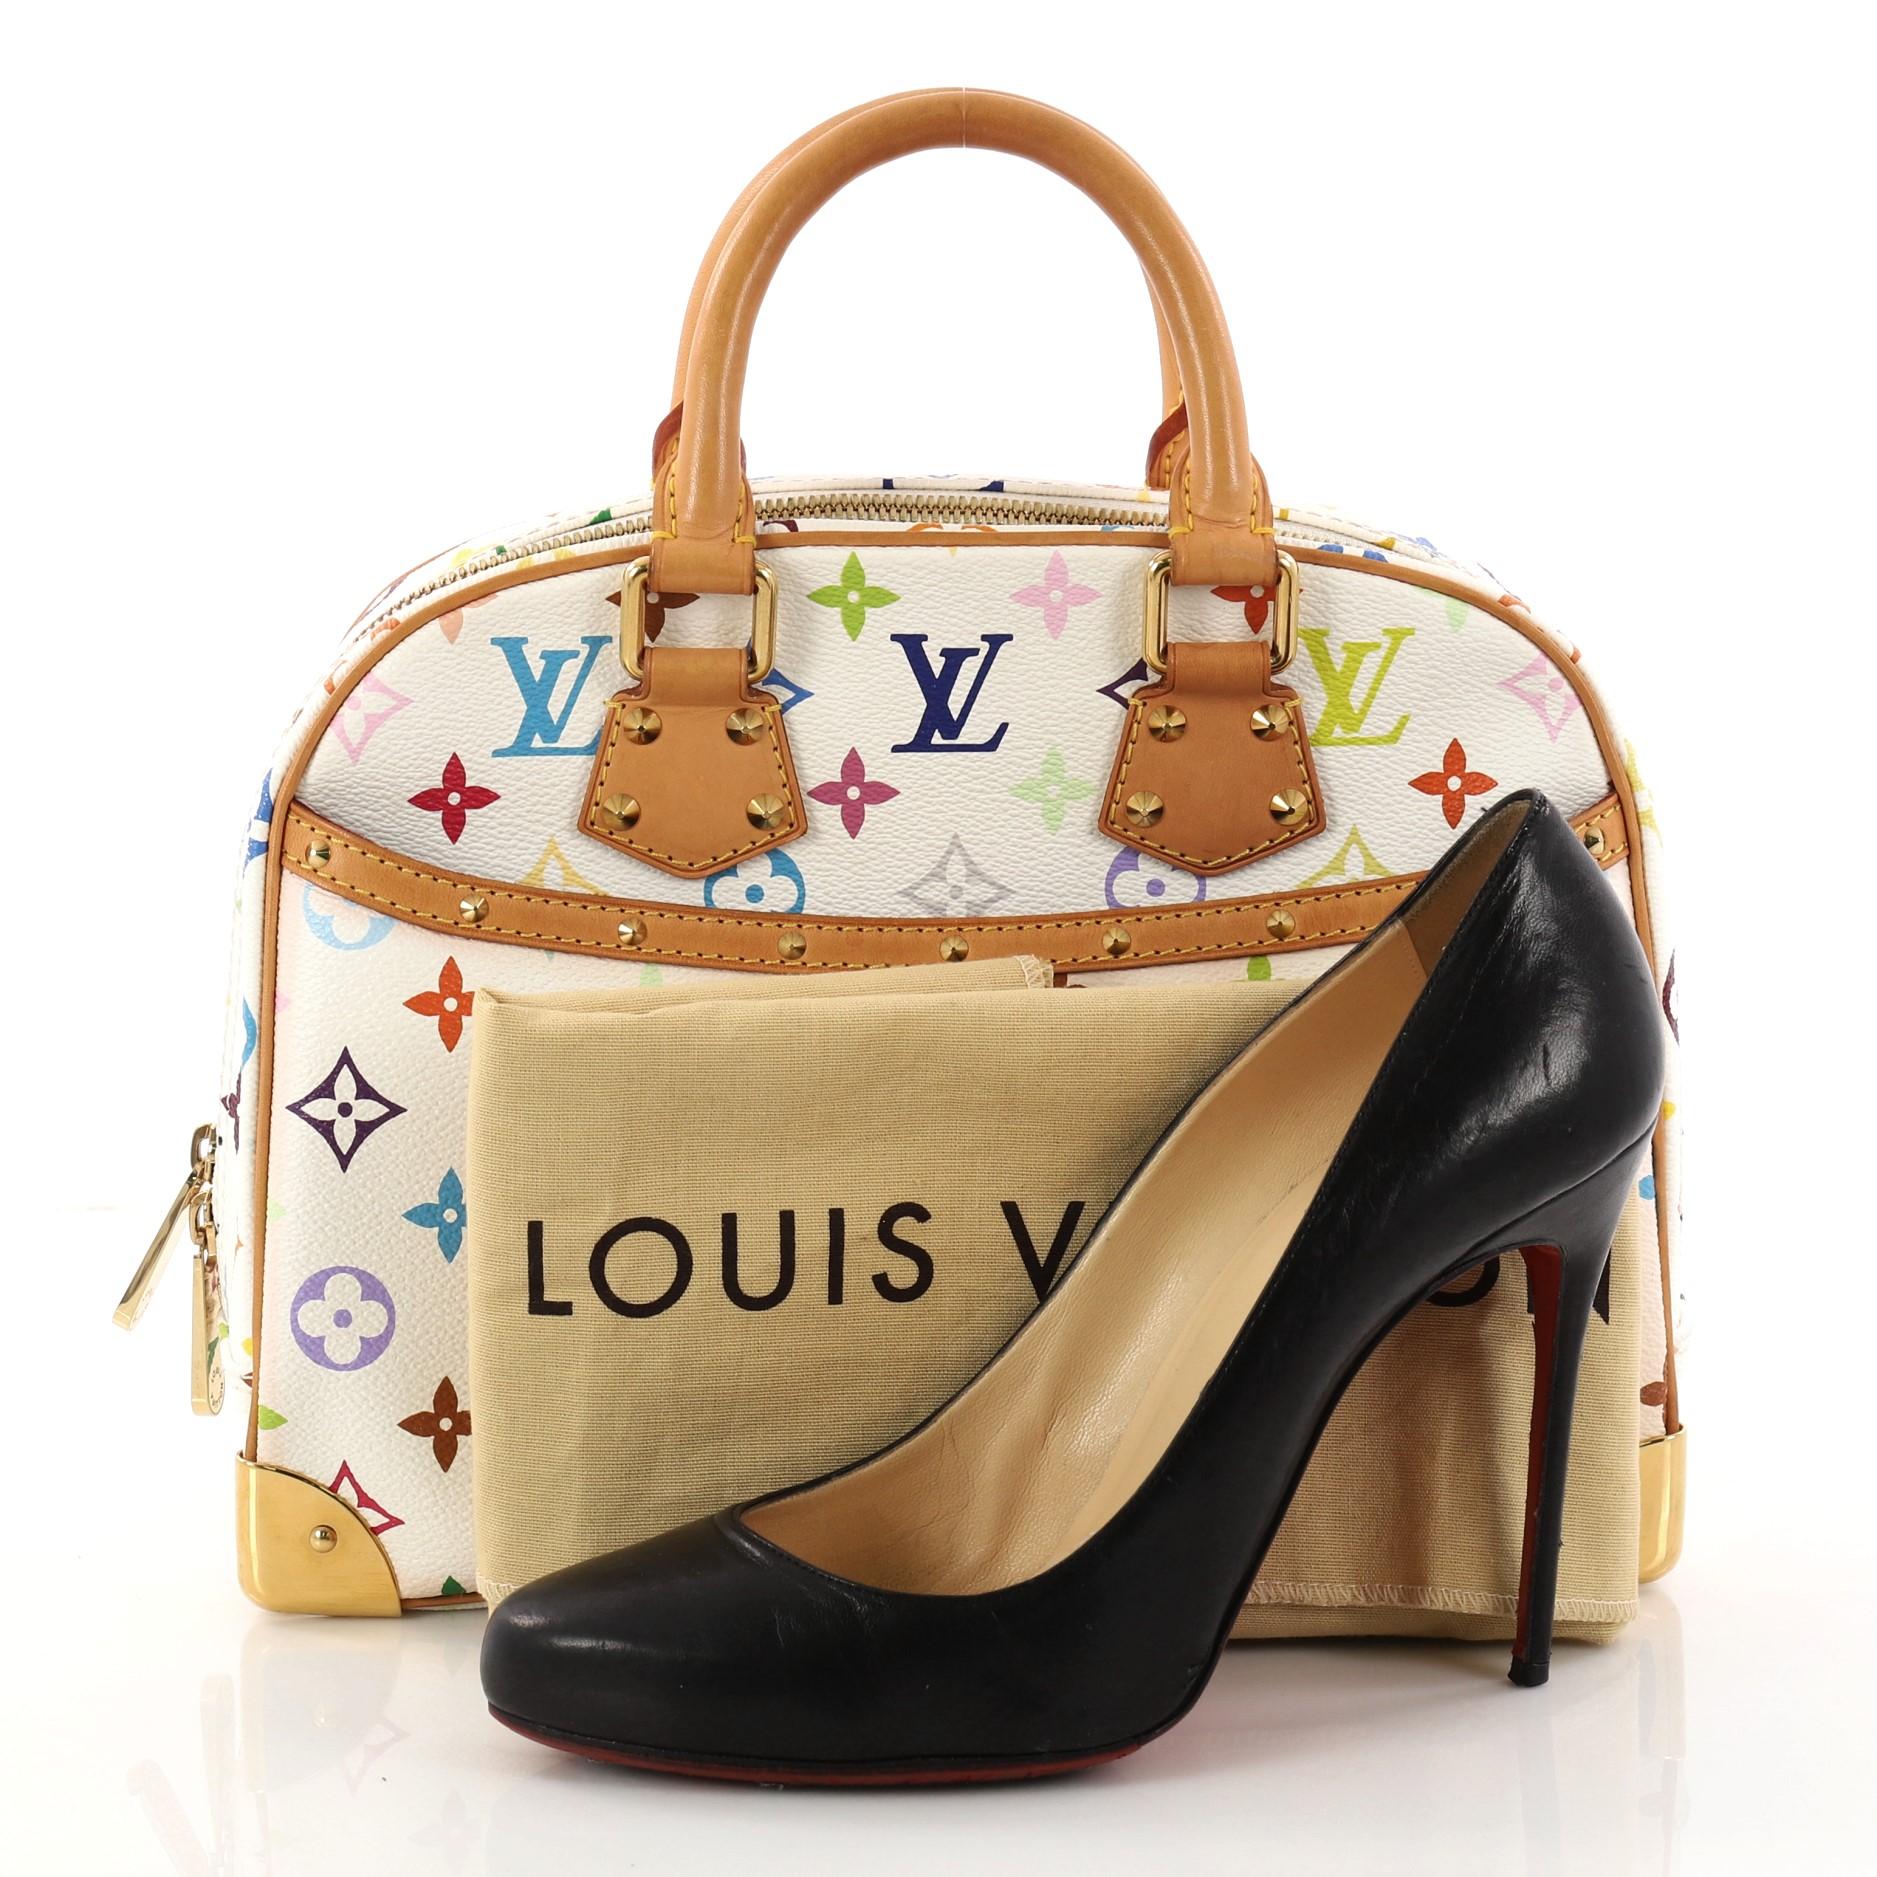 This authentic Louis Vuitton Trouville Handbag Monogram Multicolor is the perfect accessory for day to night use. Crafted with Louis Vuitton's signature white multicolor monogram coated canvas, this handy bag features dual-rolled handles, natural